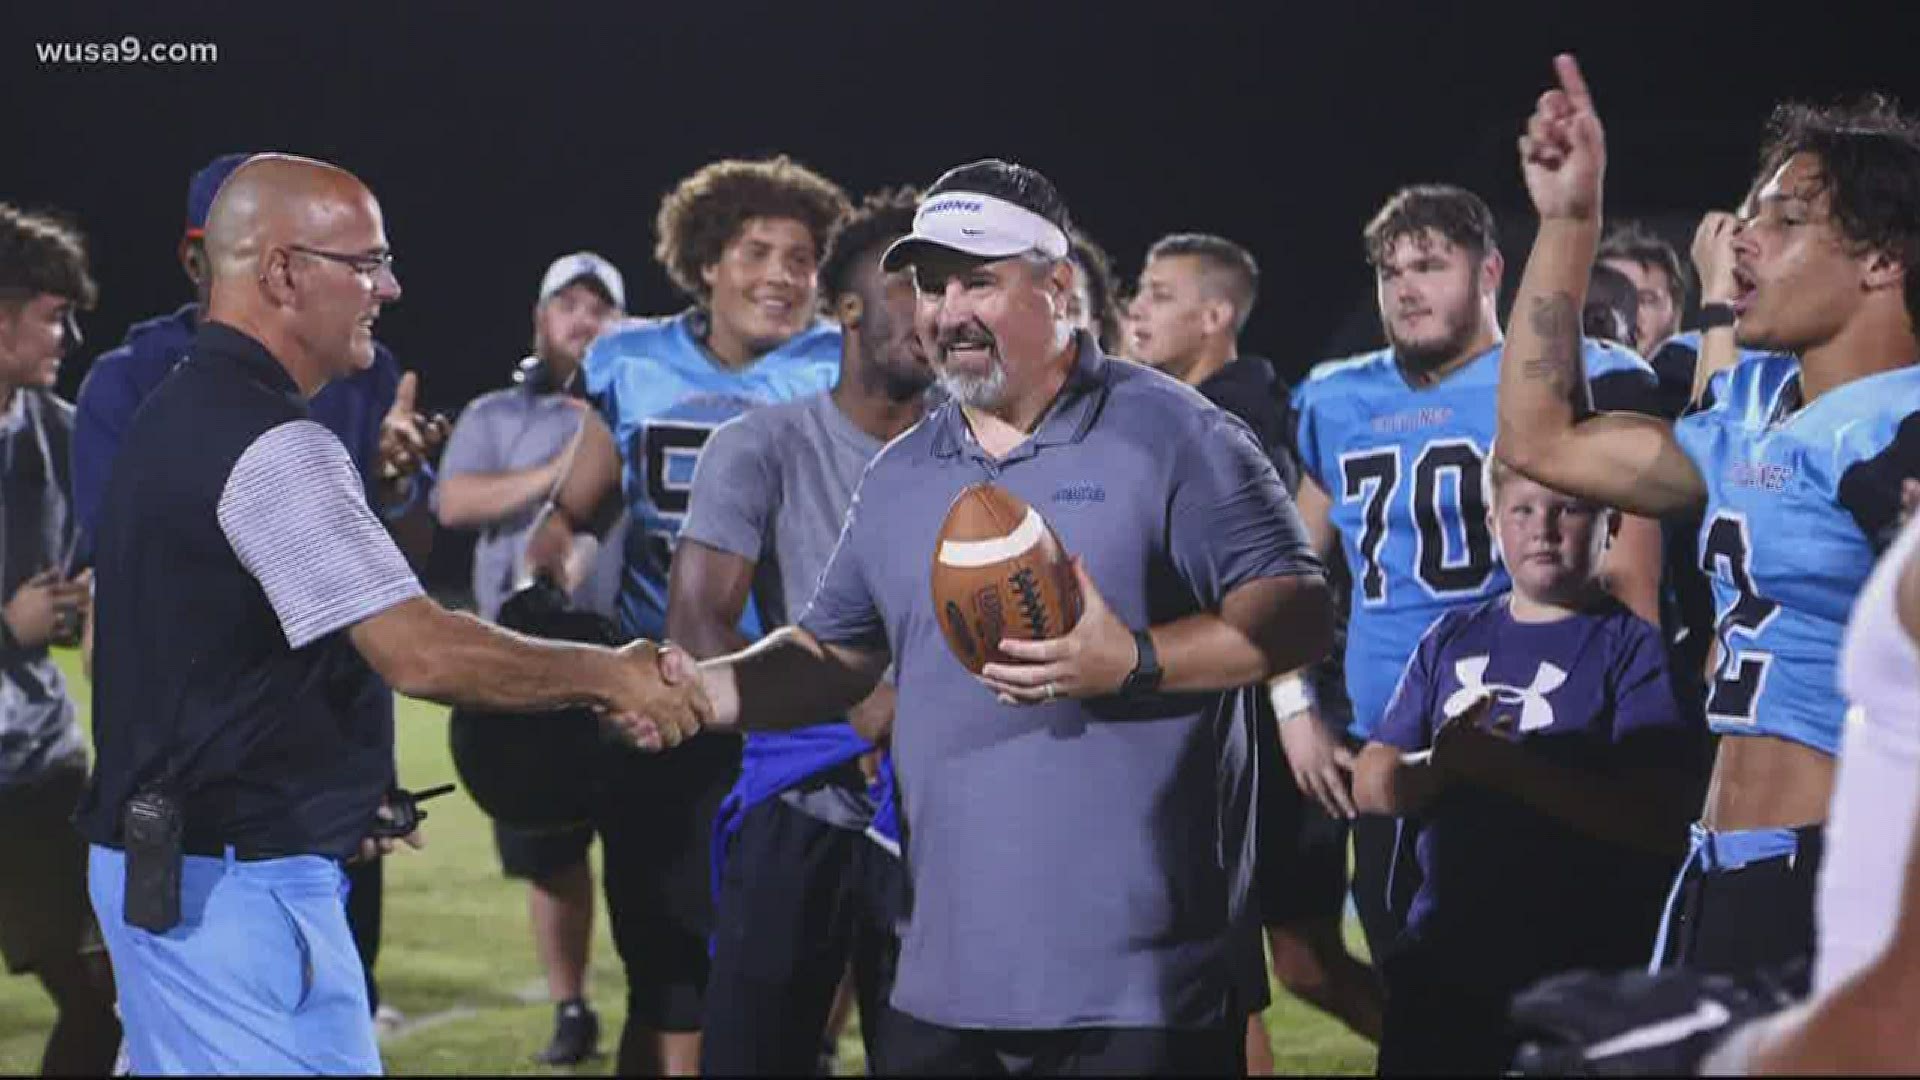 Eastern View High School football coach Greg Hatfield is using social media to keep his players connected and training, while following social distancing protocols.